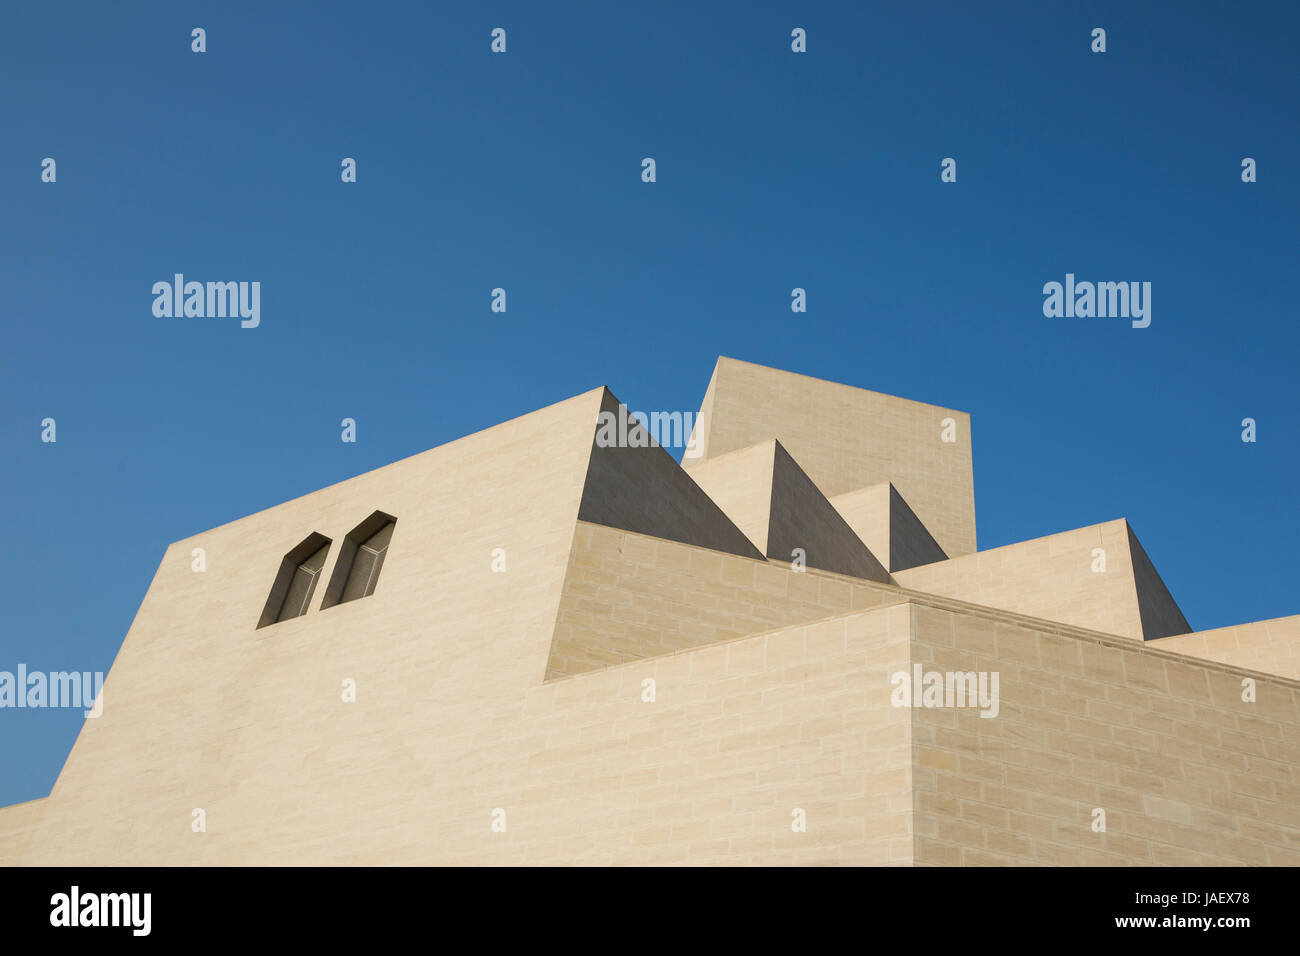 The upper level of the Museum of Islamic Art in Doha, Qatar Stock Photo